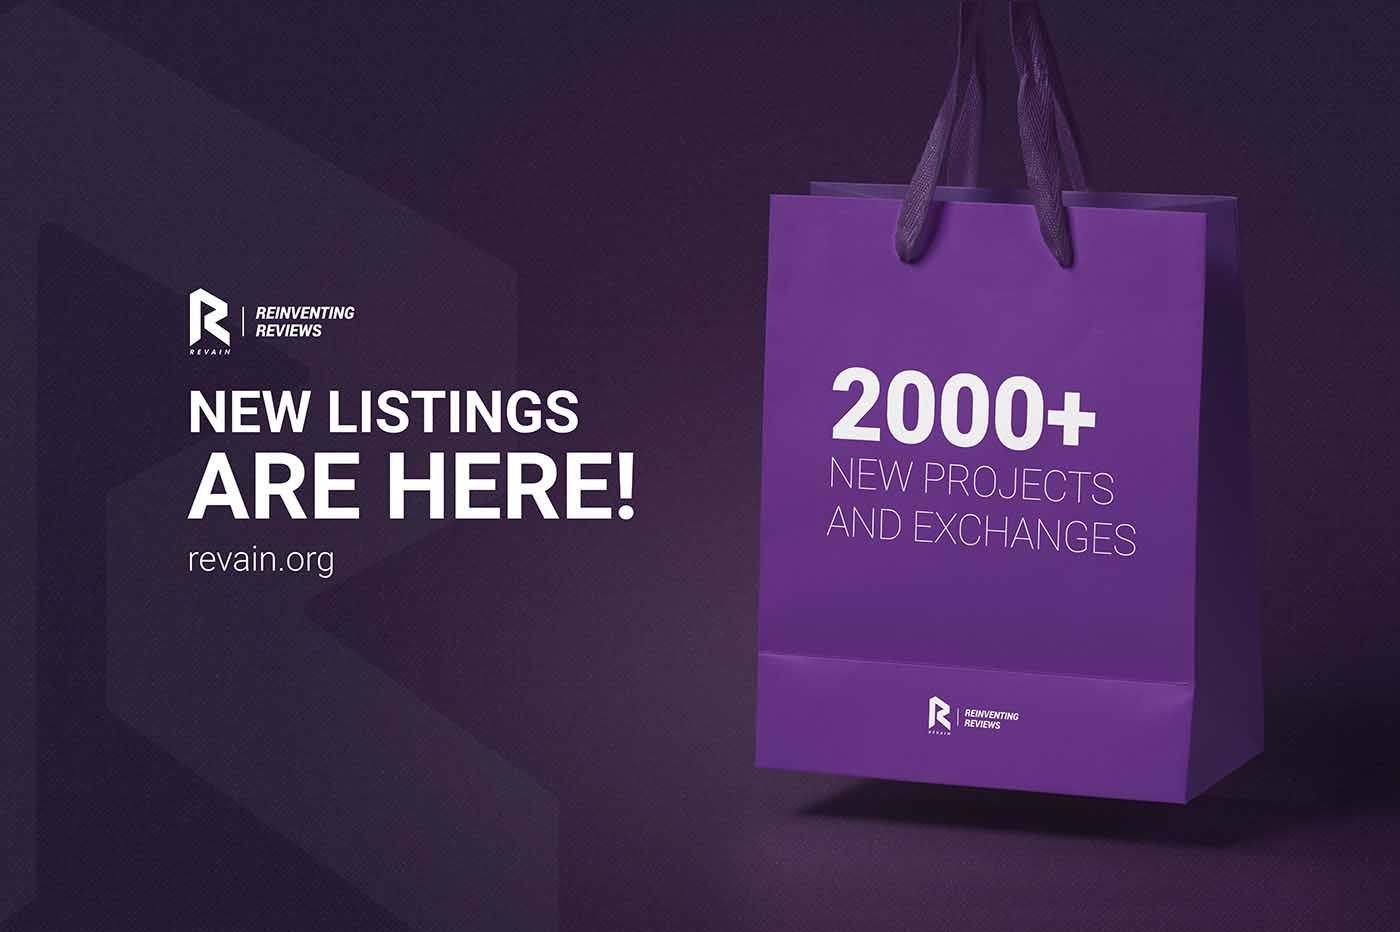 Article More than 2000 crypto projects and exchanges were listed on Revain